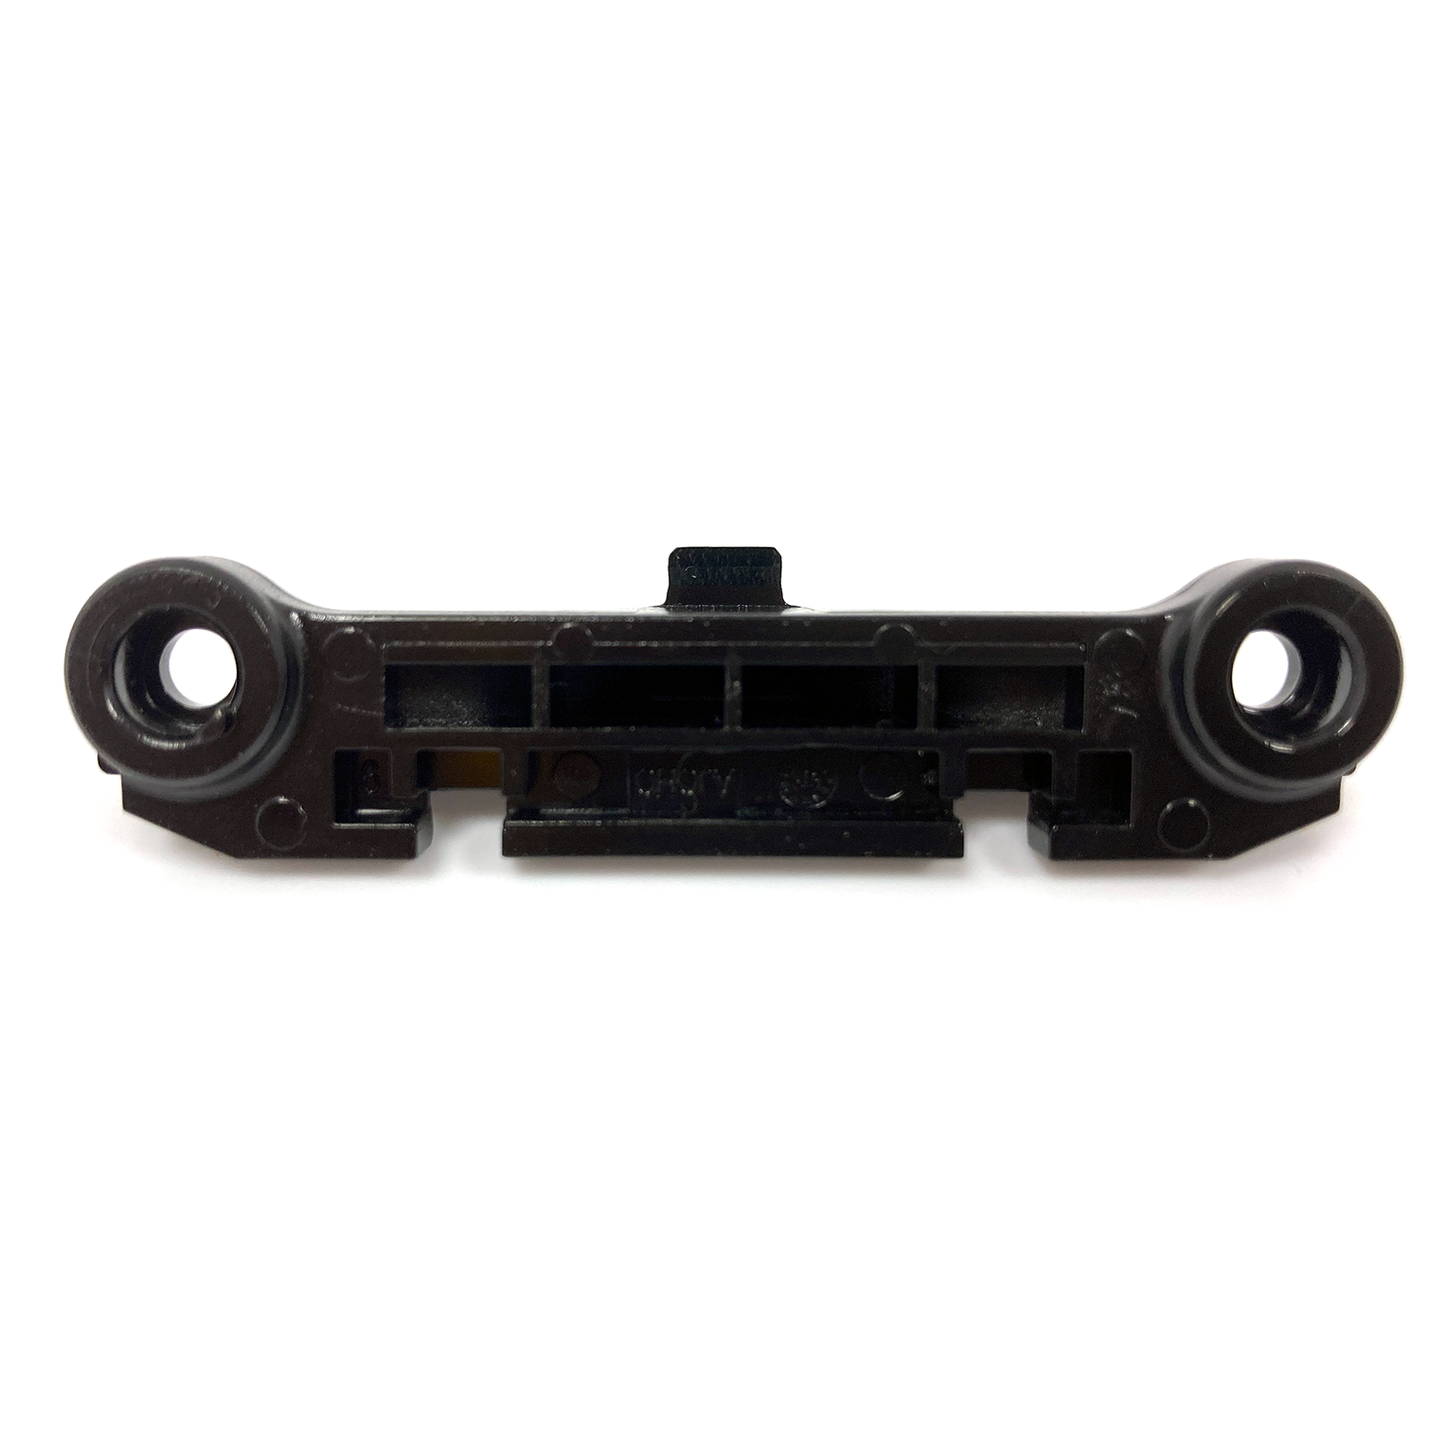 CPU Fan Bracket clips are used specifically for the Pro-Series Motherboard